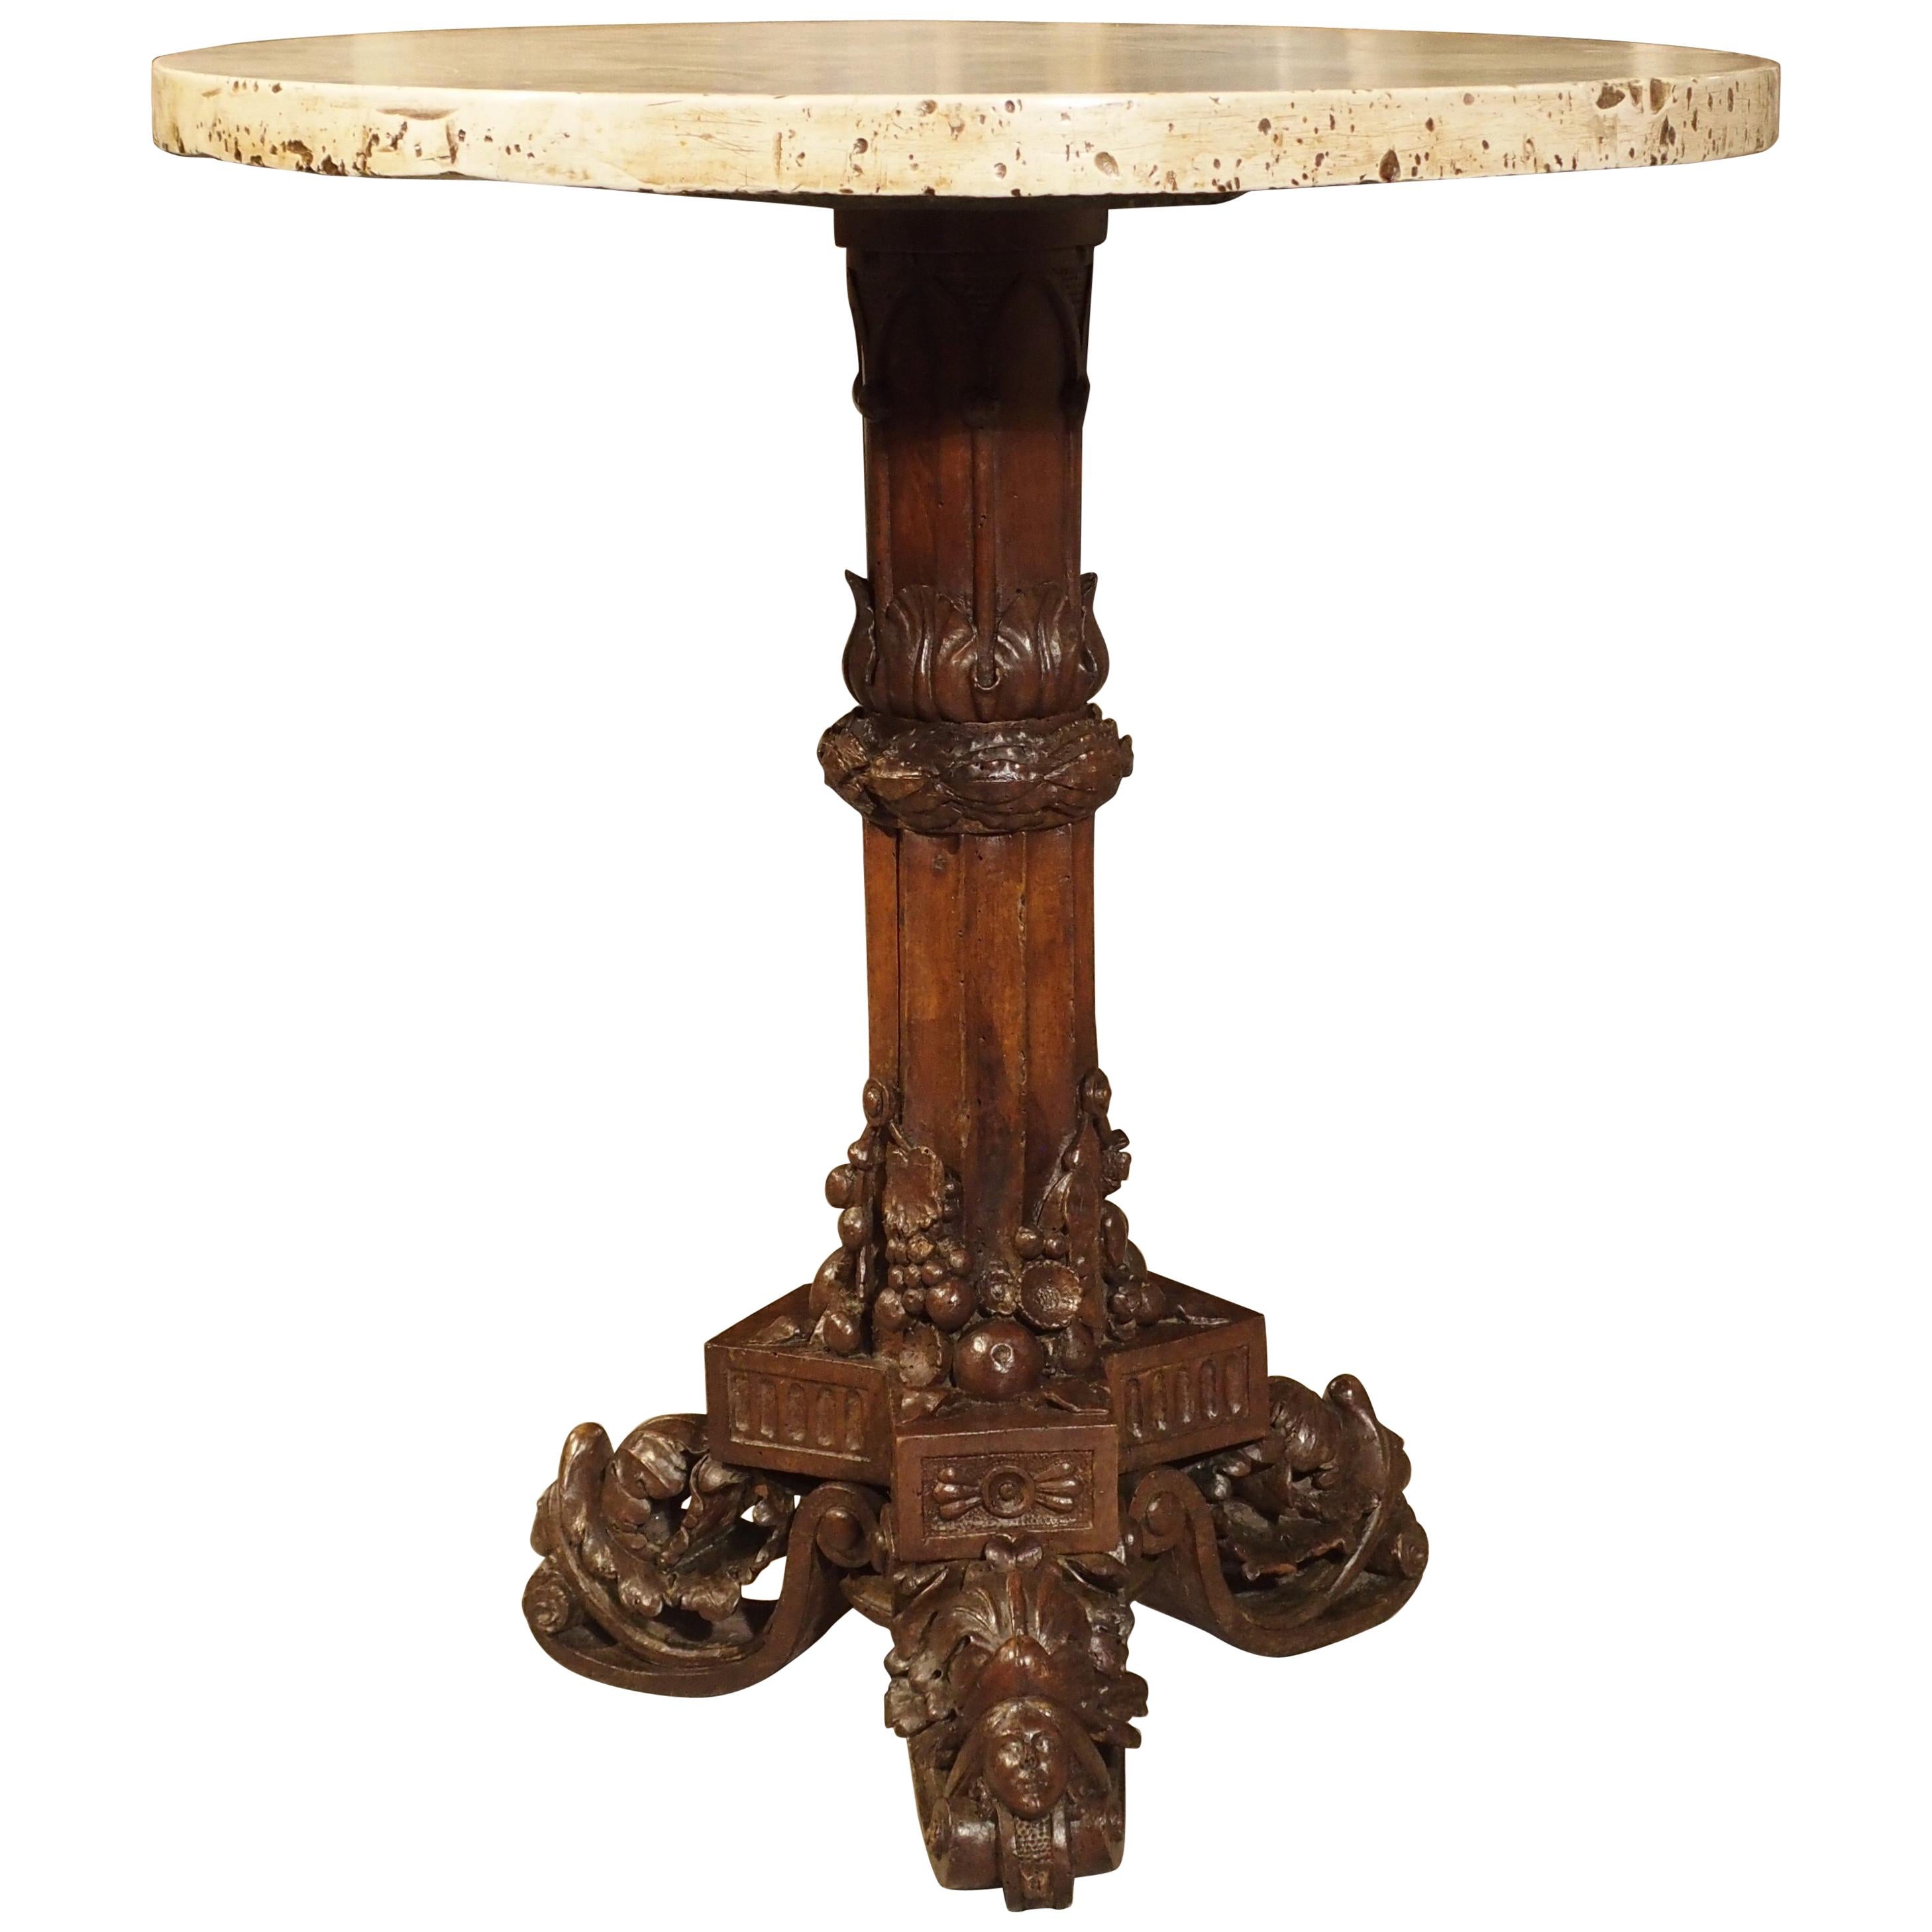 Antique Circular Genoese Carved Wood and Marble Table, circa 1820 For Sale